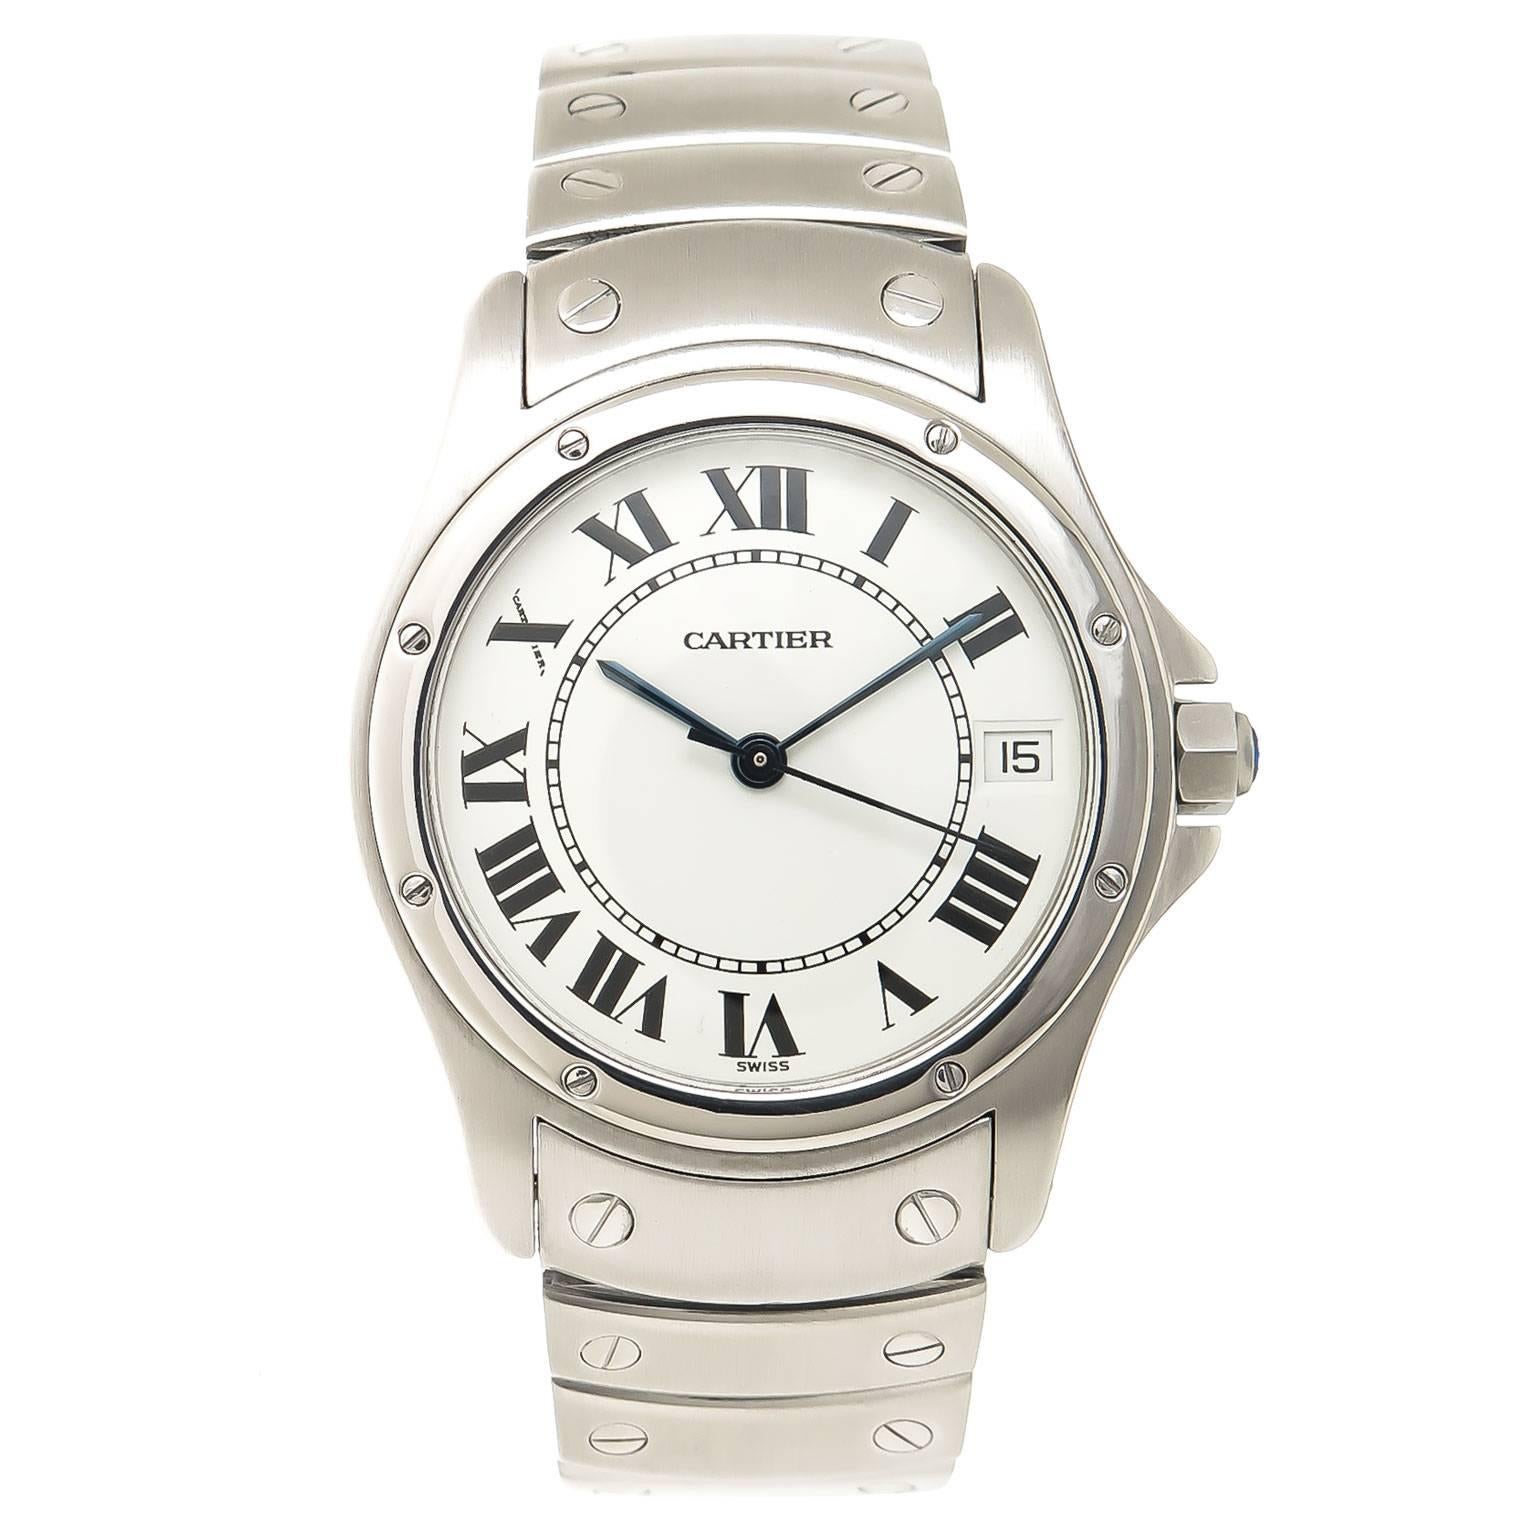 Cartier Stainless Steel White Dial Santos Automatic Wristwatch